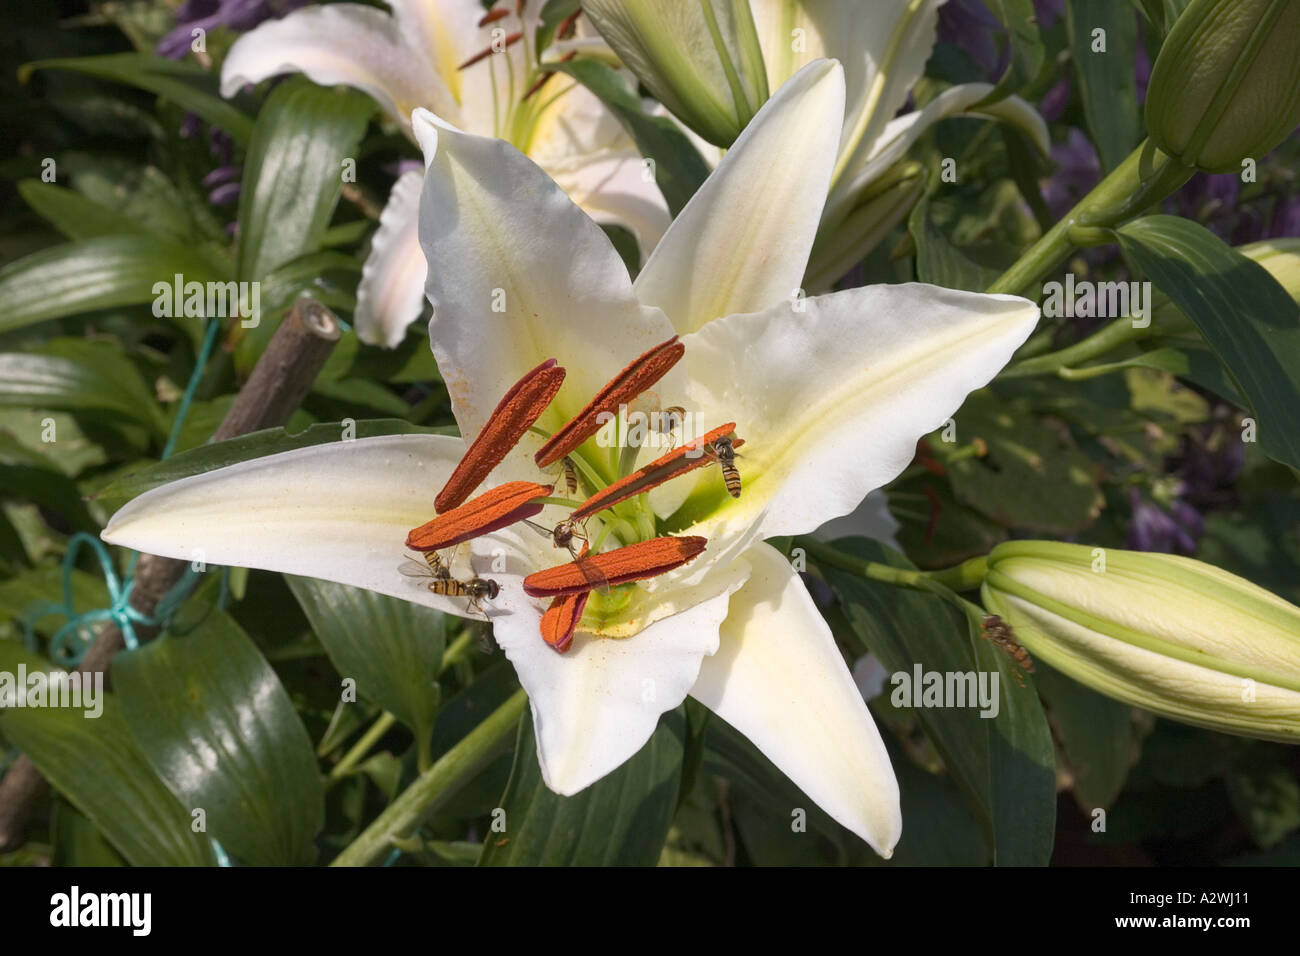 Hoverflies taking pollen from lily Stock Photo